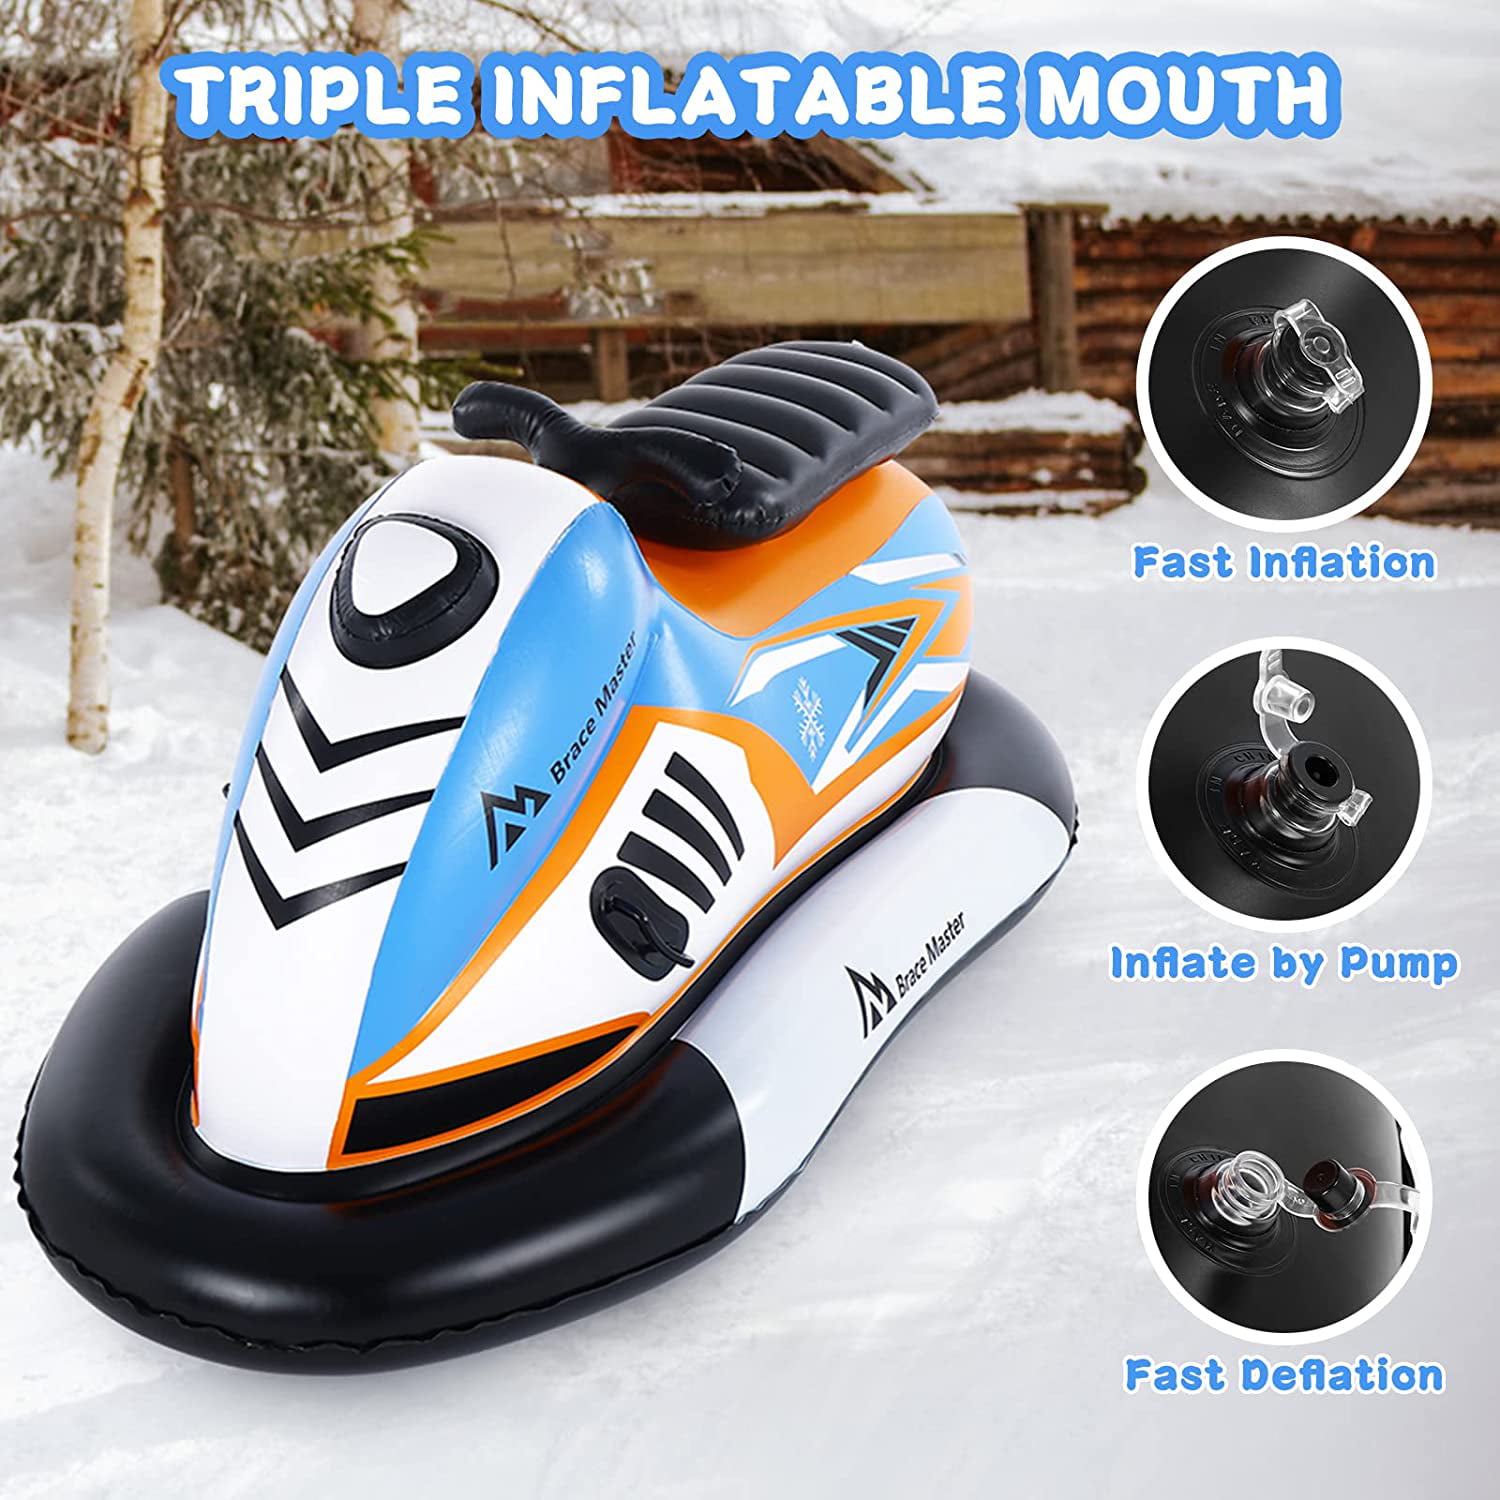 Brace Master Snow Tube 47 Inch Inflatable Heavy Duty Snow Sled Tube 6mm Thickness Material for Highly Tolerant Abrasion Great for Kids and Adults Ideal for Winter Fun 